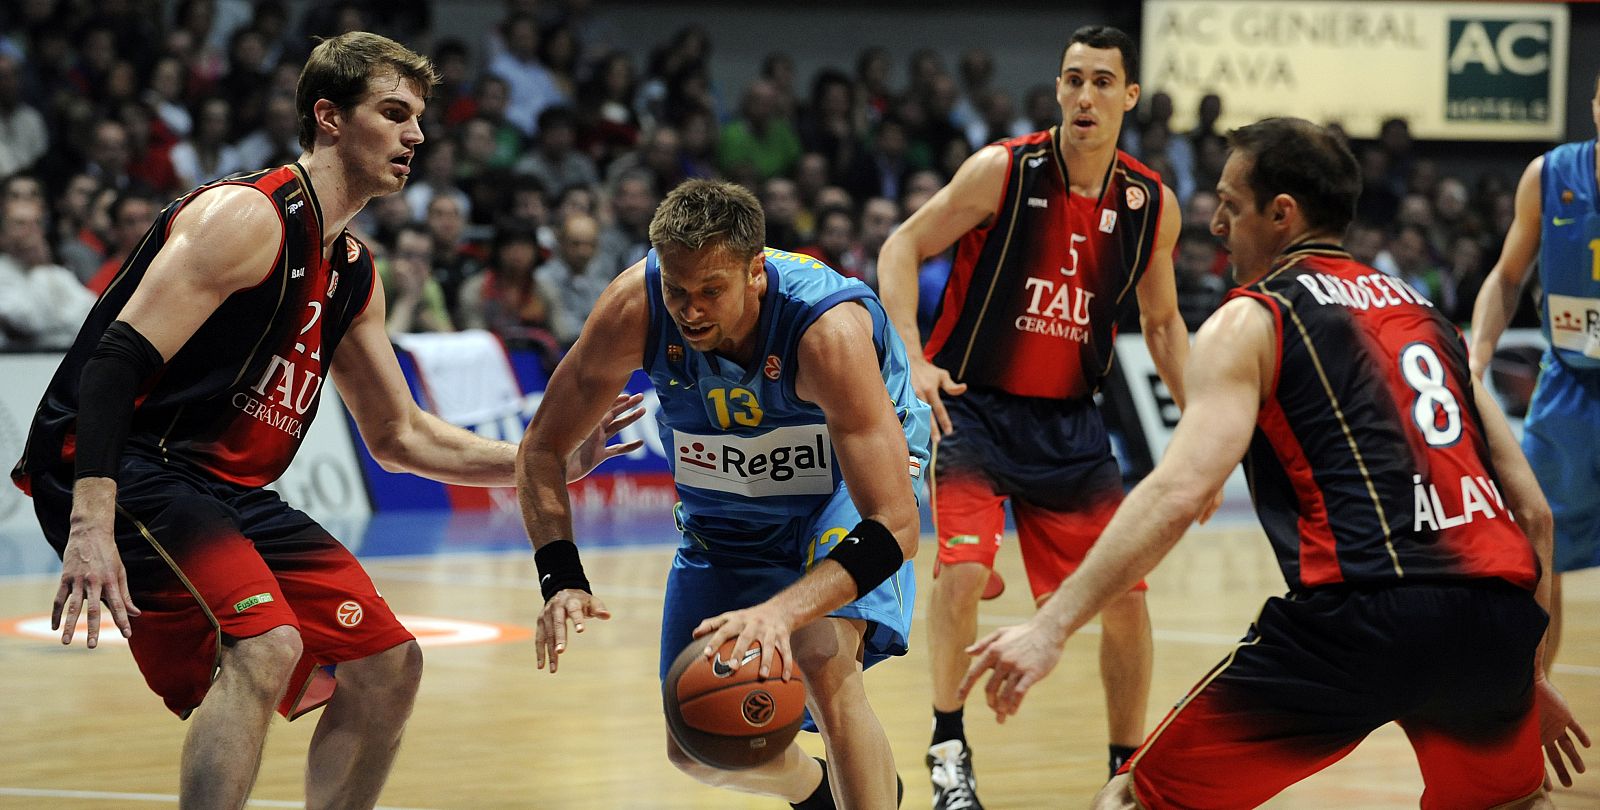 Regal FC Barcelona's Andersen passes Tau Ceramica's Splitter and Rakocevic during their Euroleague basketball game in Vitoria.